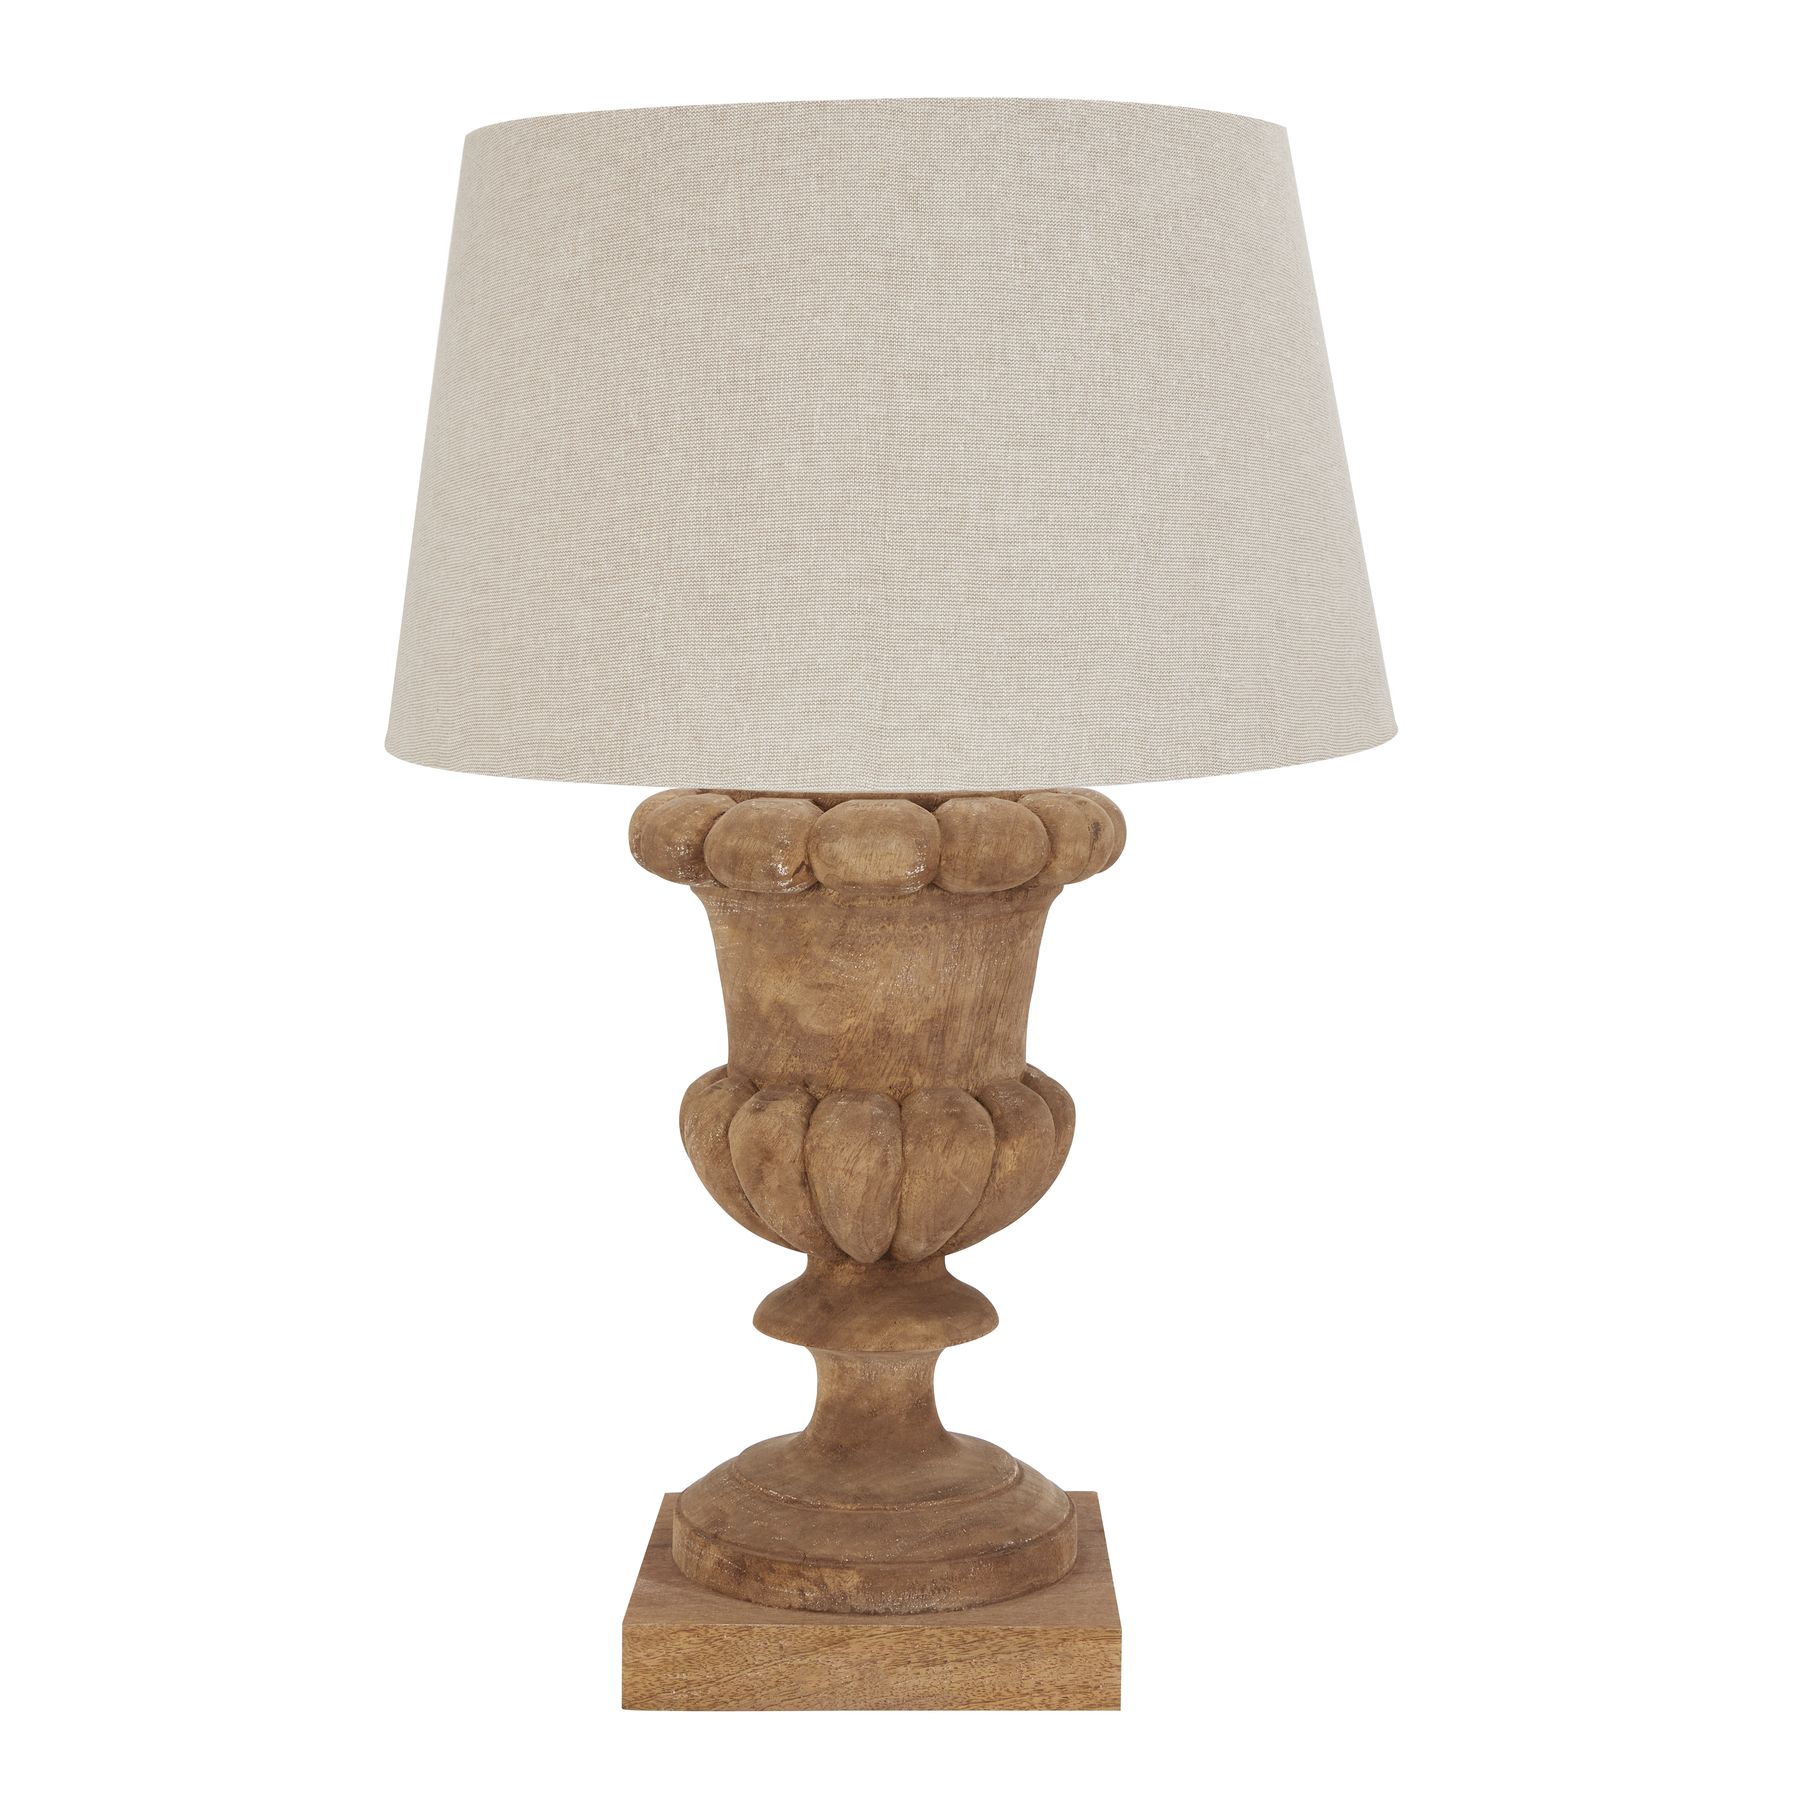 Delaney Natural Wash Fluted Lamp With Linen Shade - Image 1